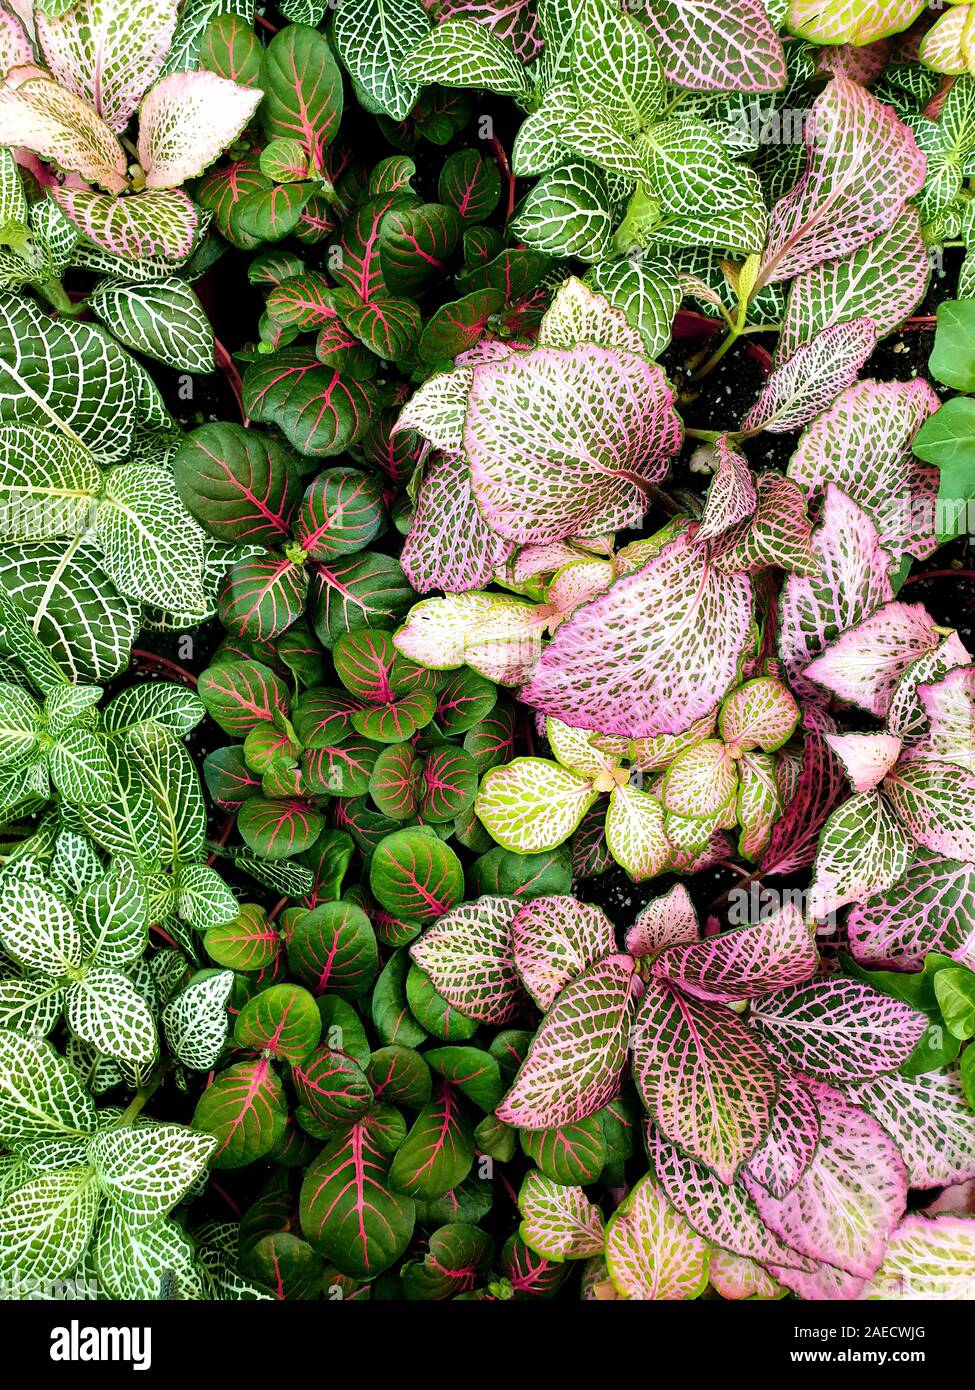 Beautiful colorful leaves of various plants. Leaves of a bright green hue grow very closely. Stock Photo